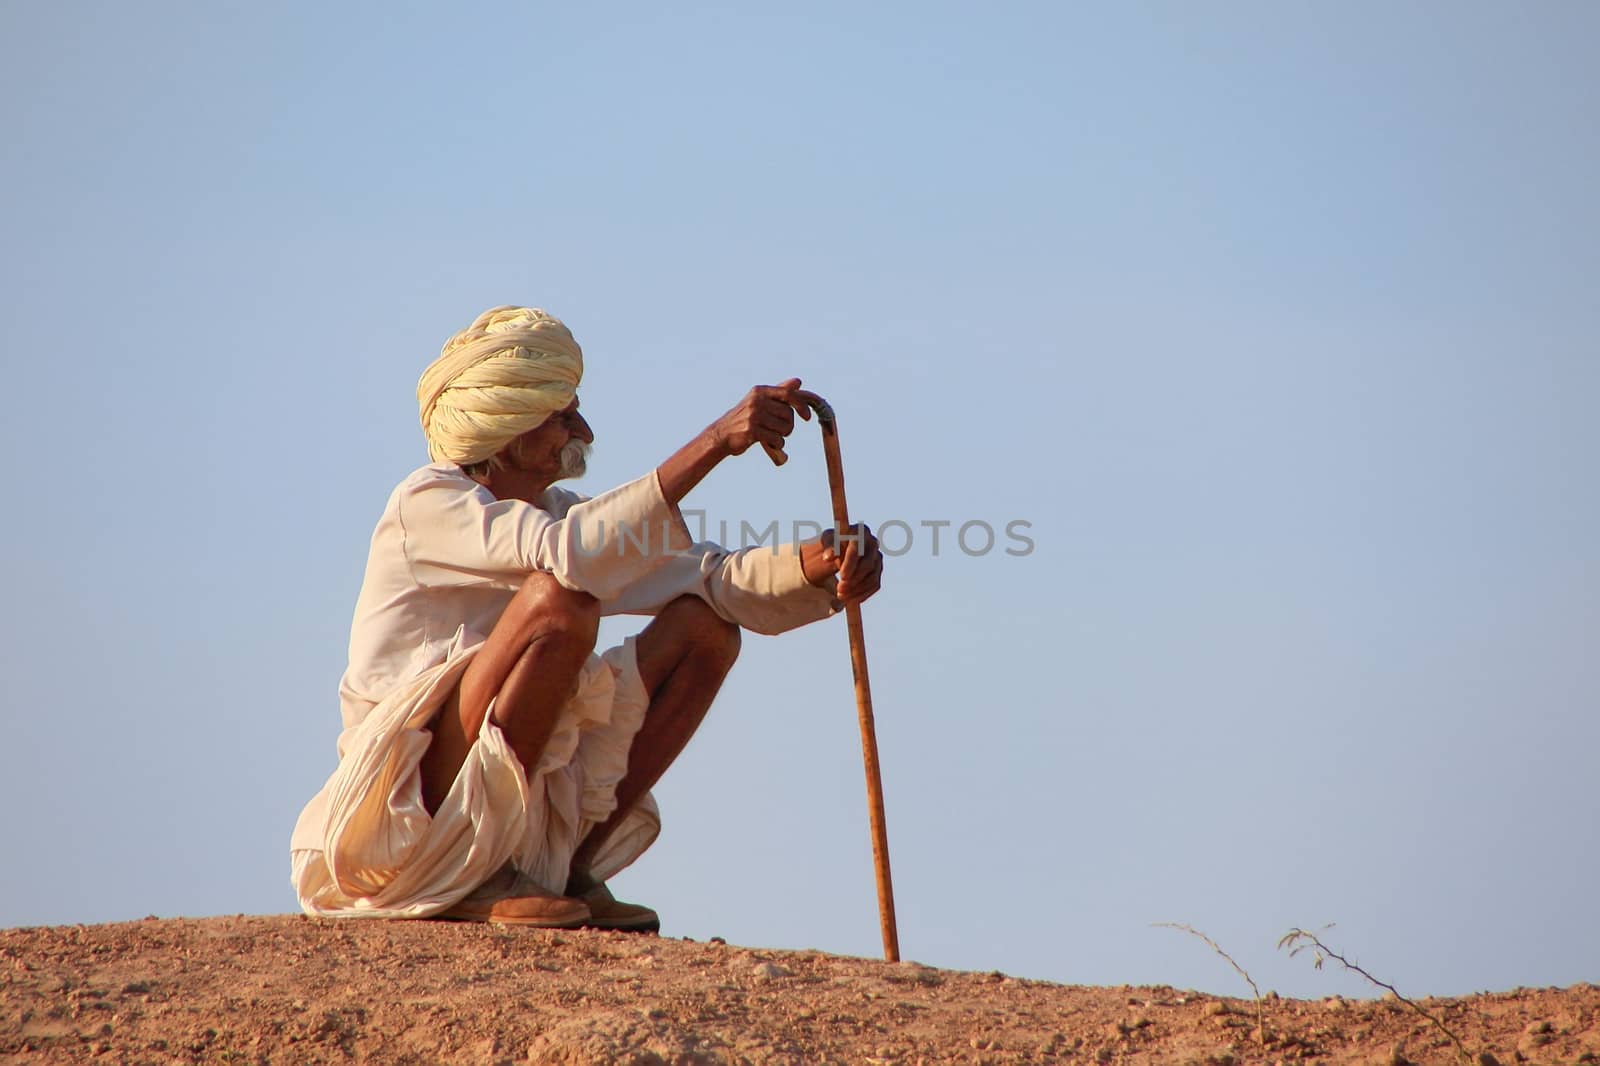 Local man sitting on a hill, Khichan village, India by donya_nedomam